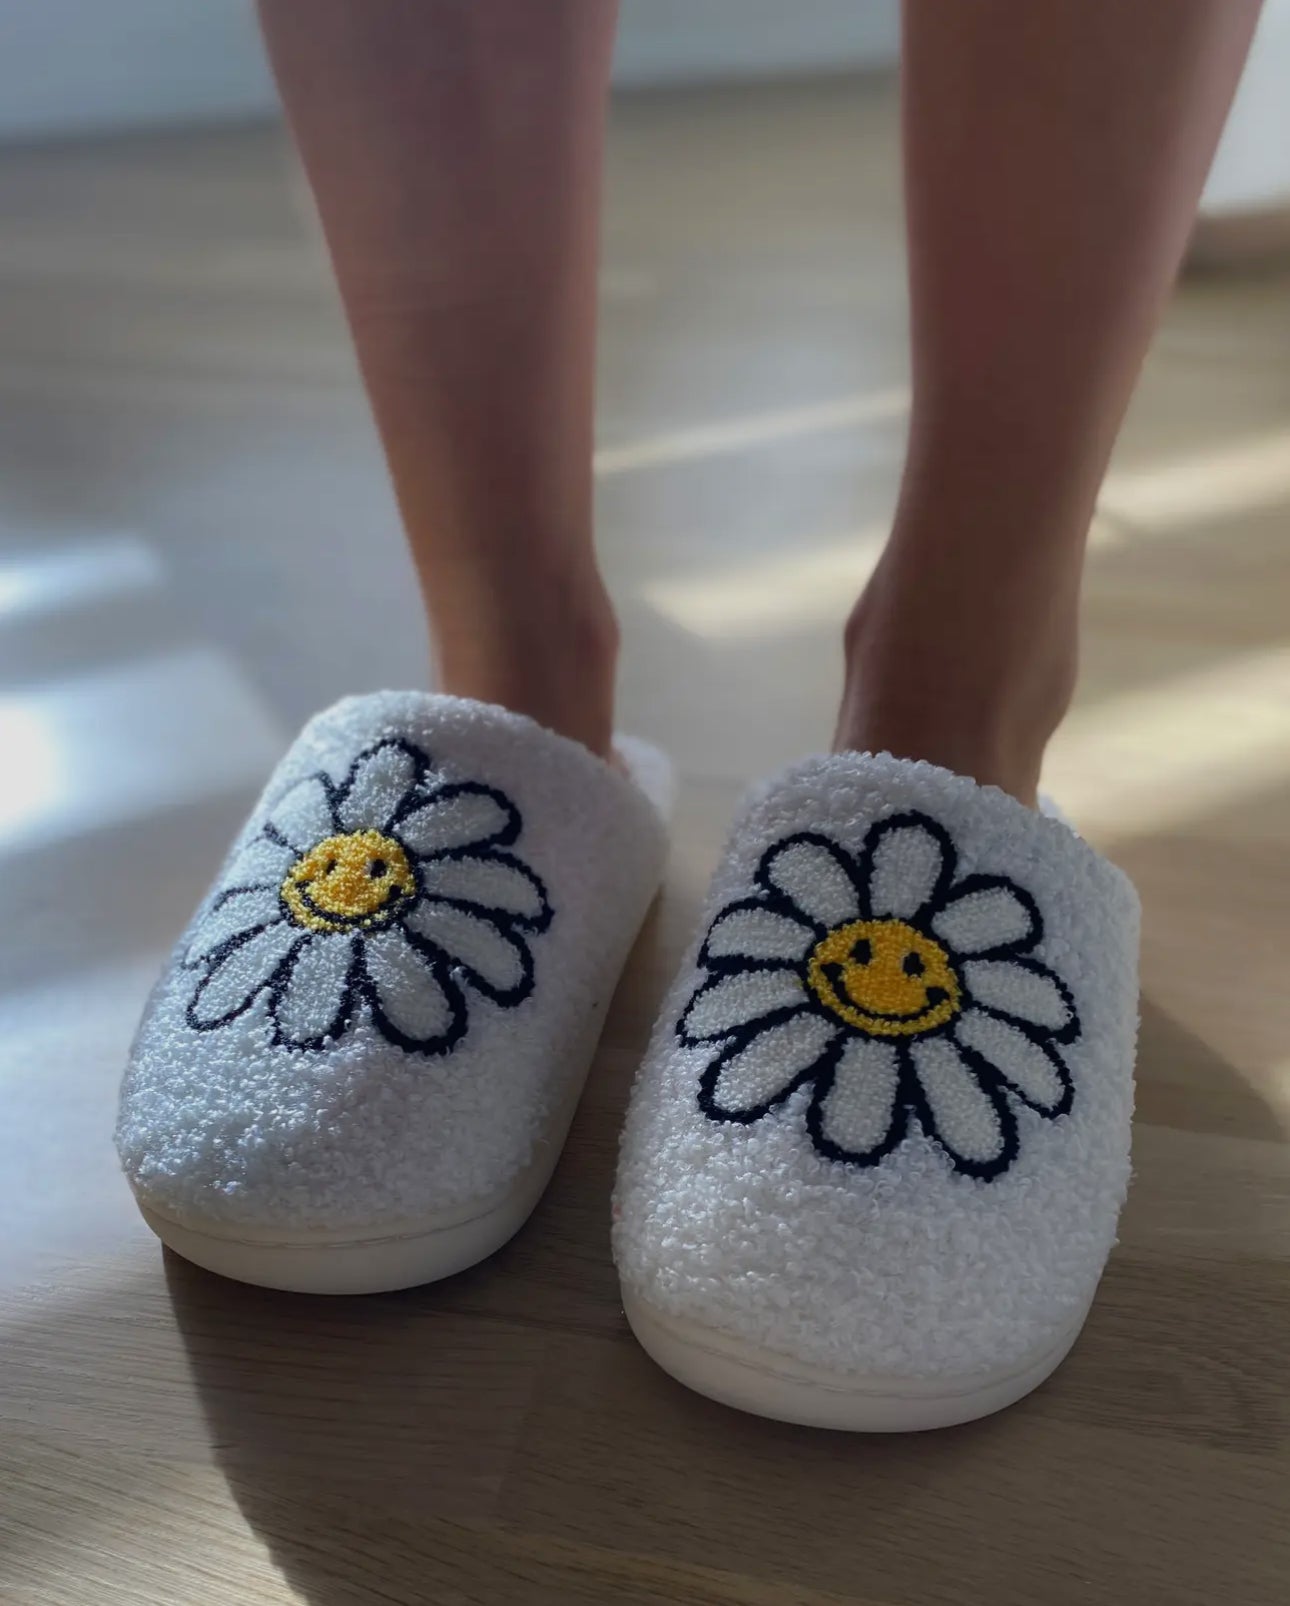 Cozy SLIPPERS Living Royal